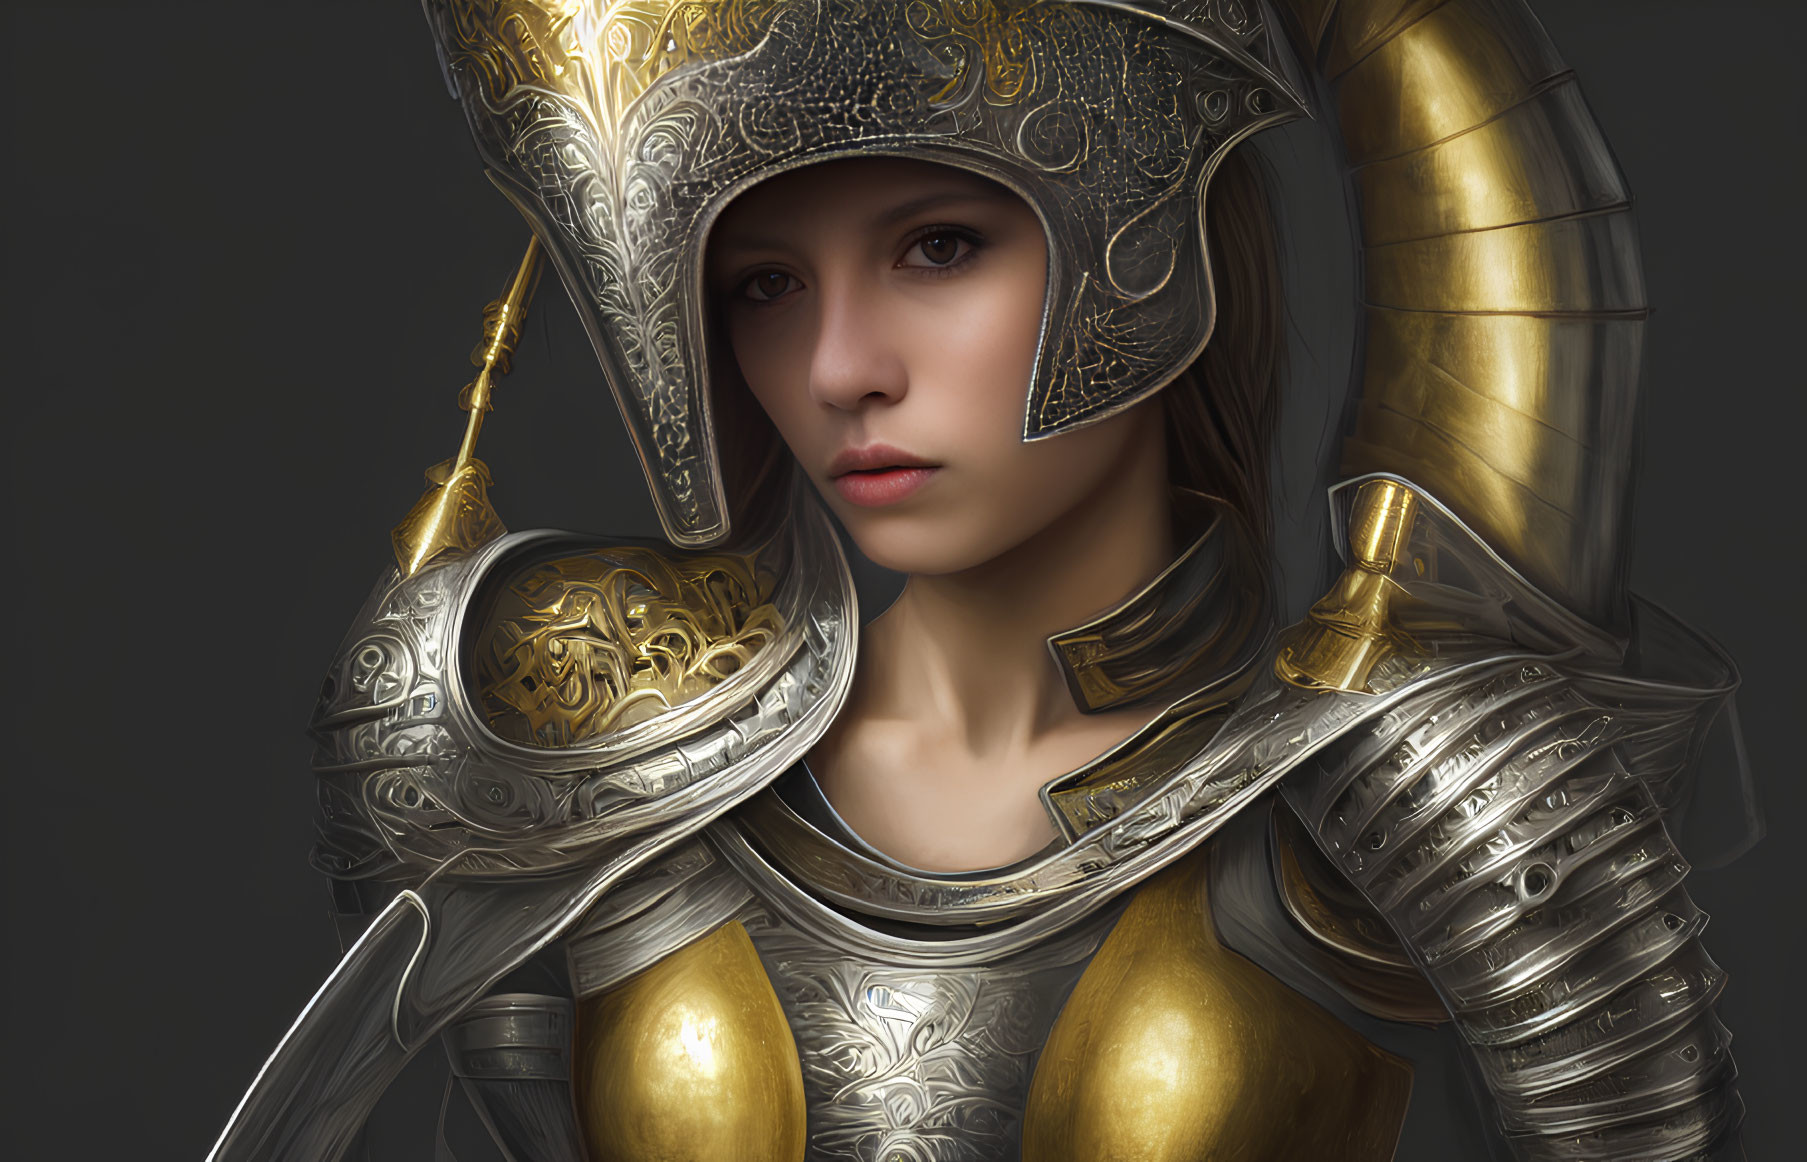 Medieval woman in ornate armor with gold filigree helmet.